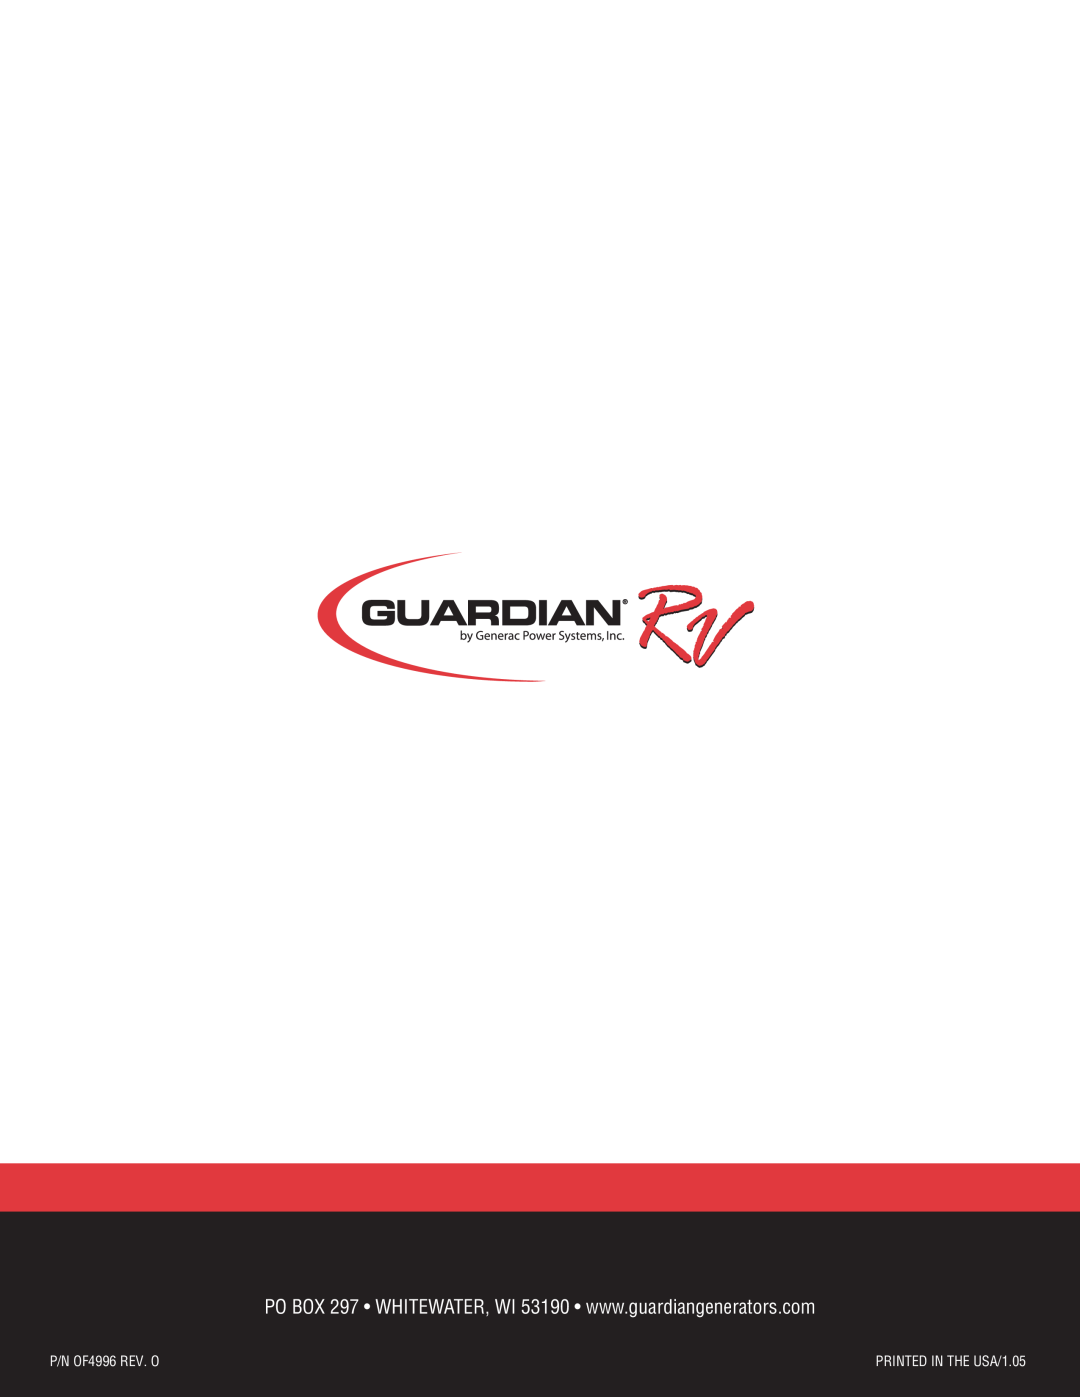 Guardian Technologies 4270 manual P/N OF4996 REV. O, PRINTED IN THE USA/1.05 